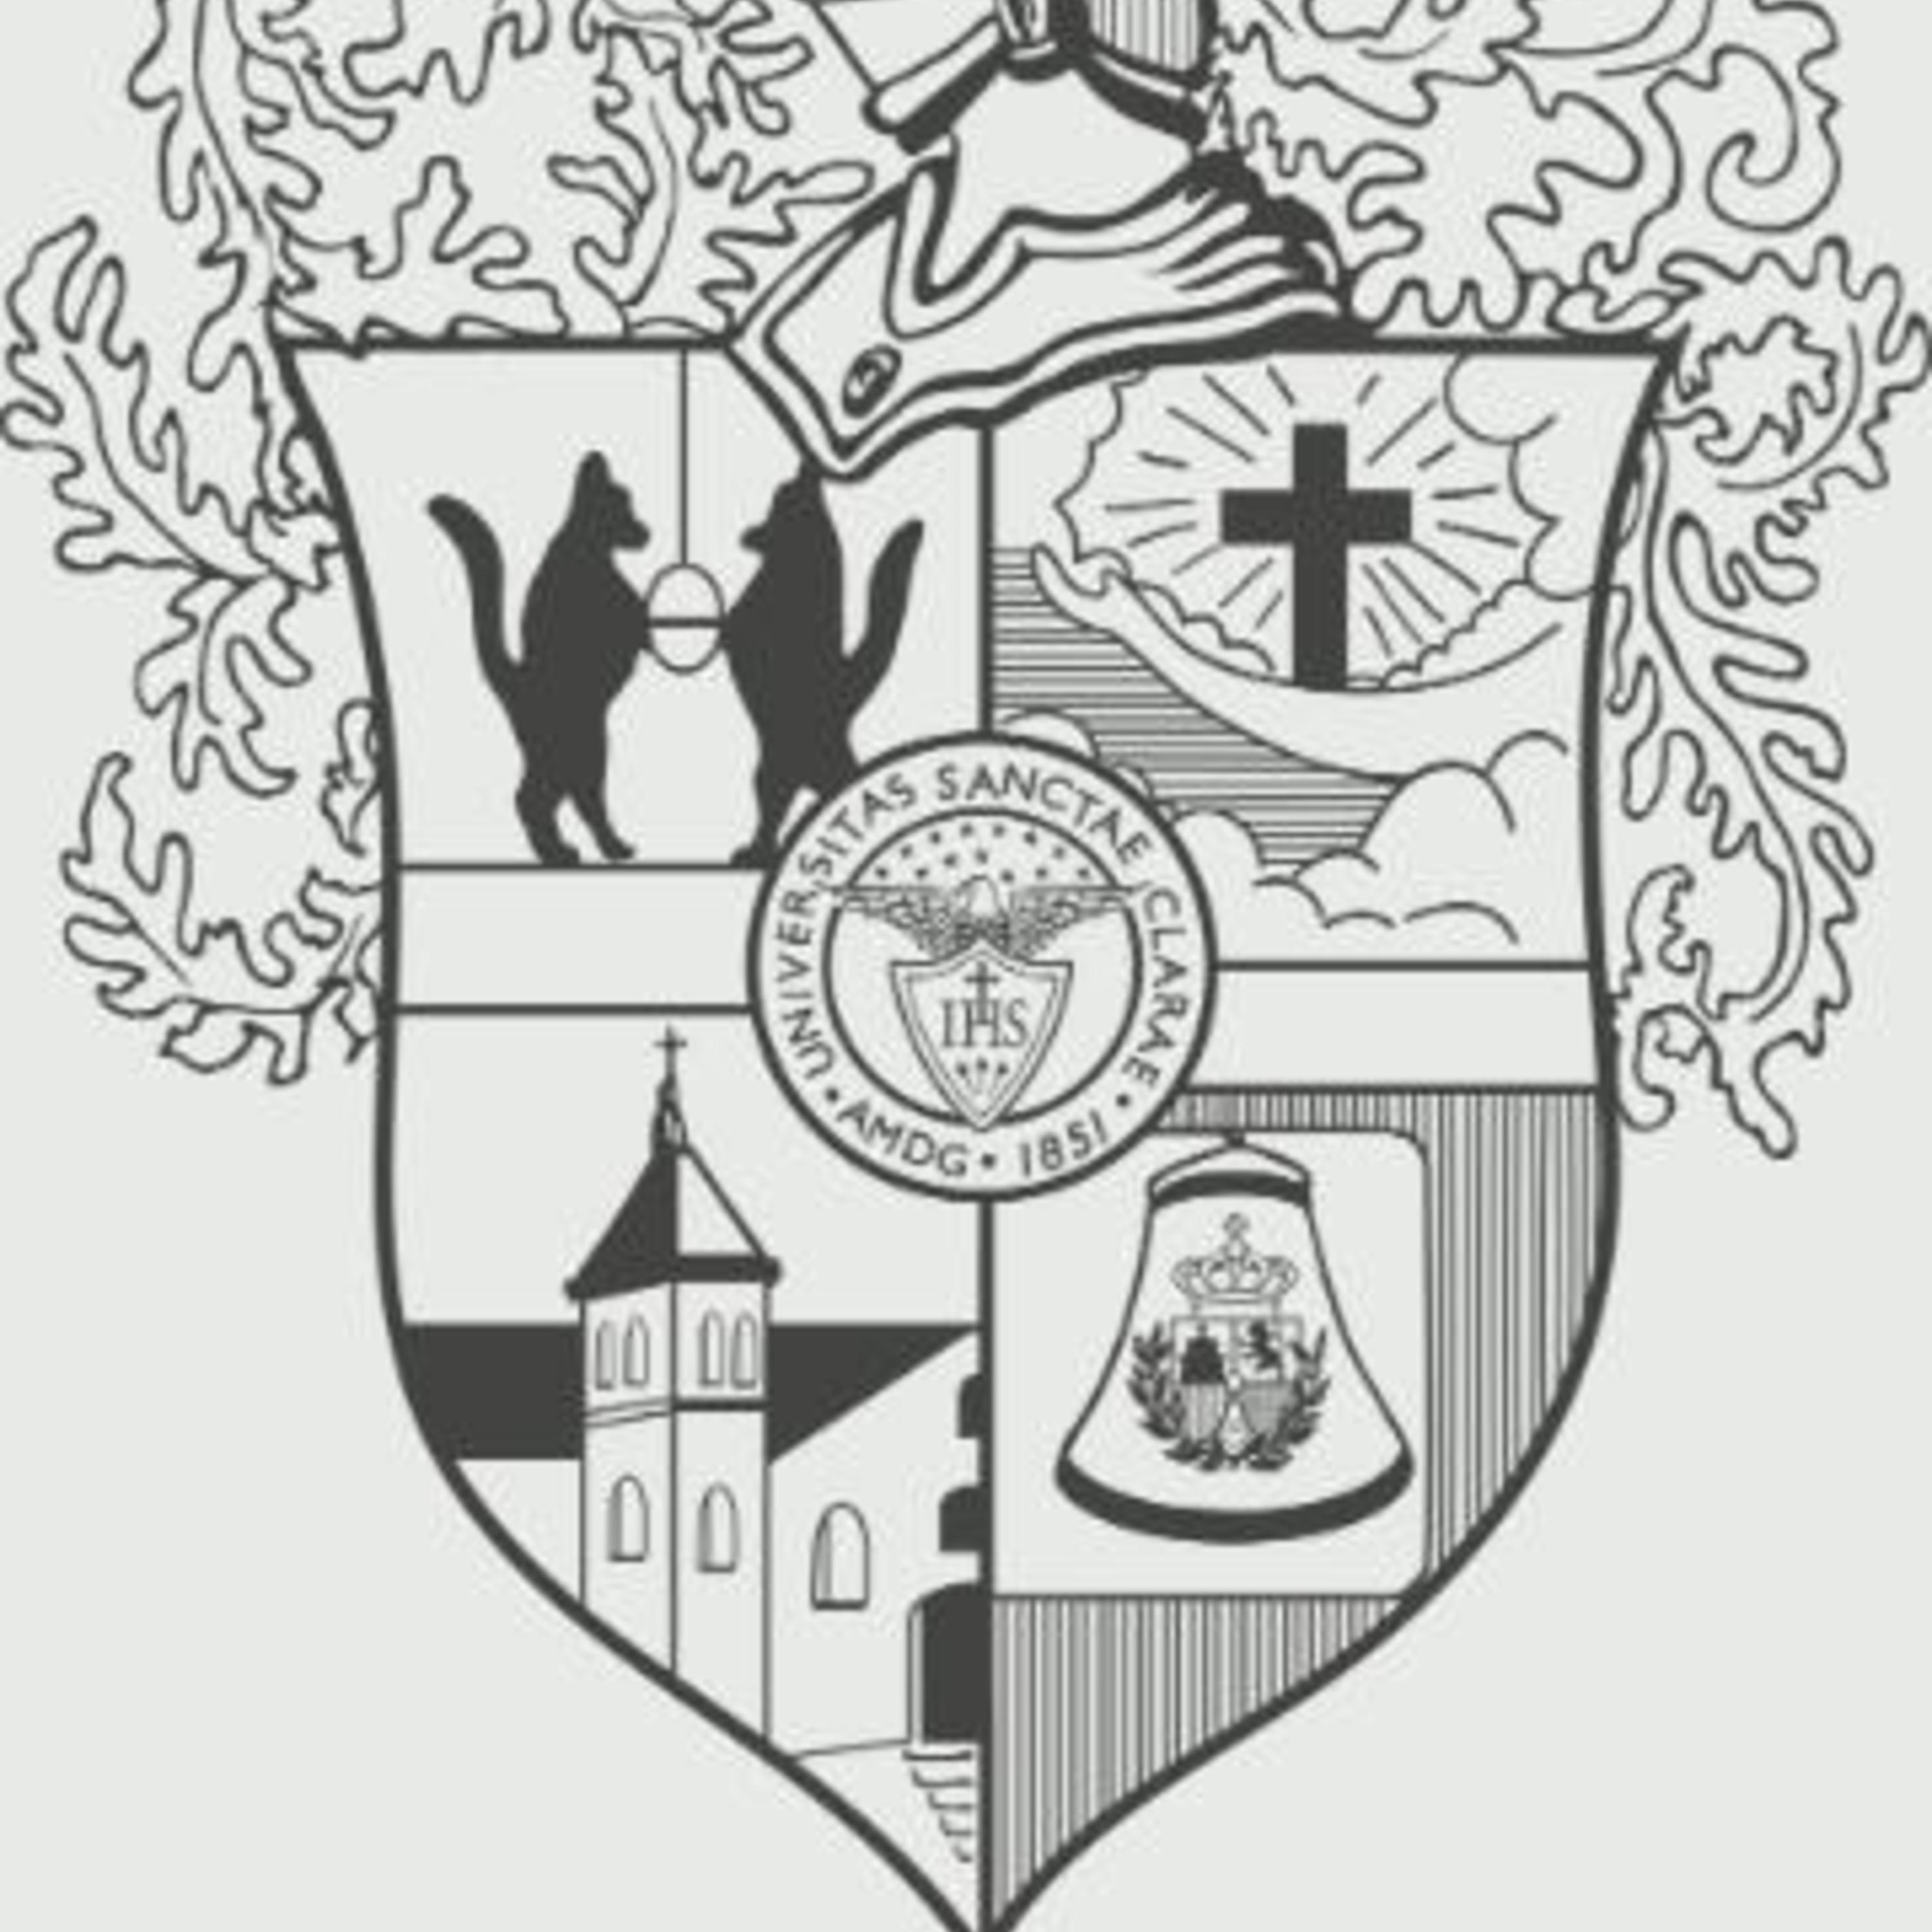 Catala Club Coat of Arms